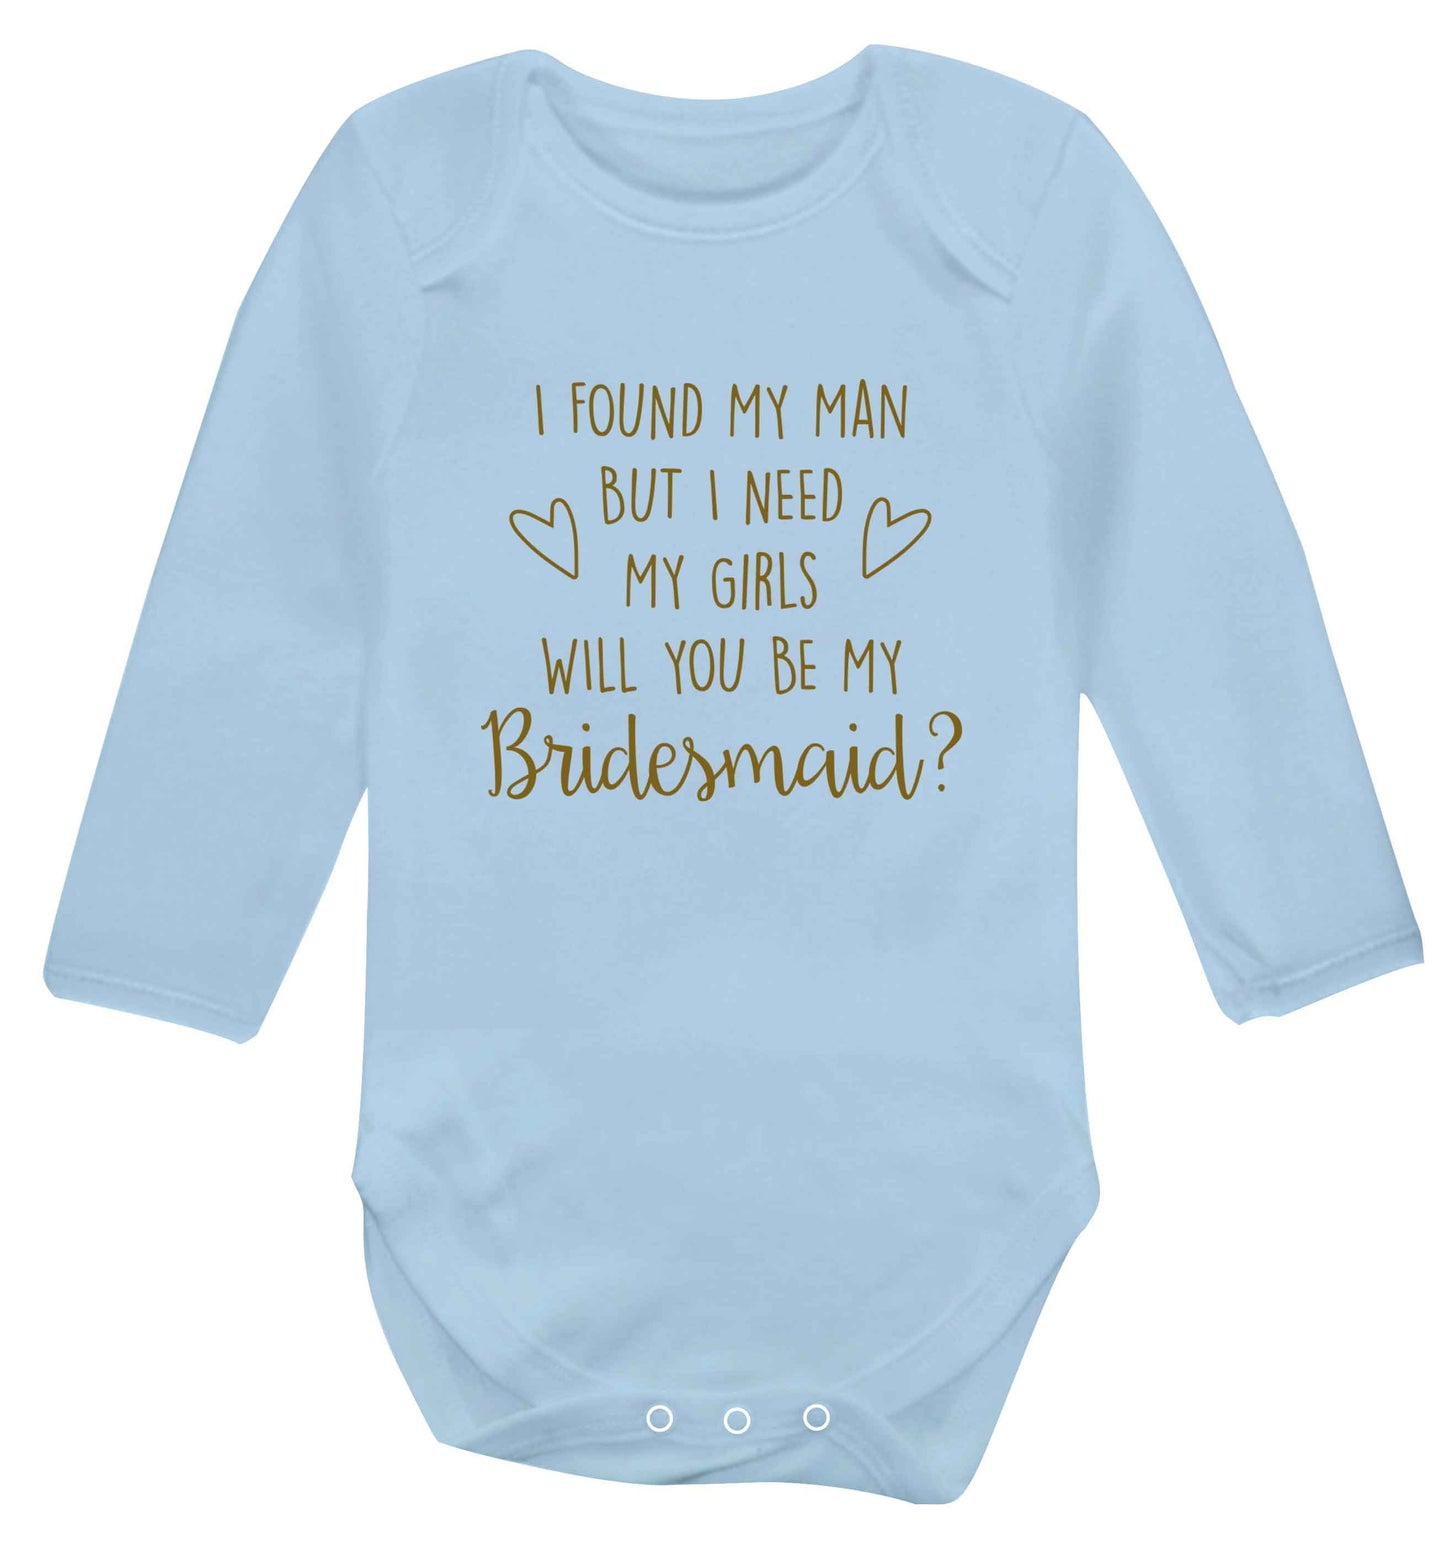 I found my man but I need my girls will you be my bridesmaid? baby vest long sleeved pale blue 6-12 months